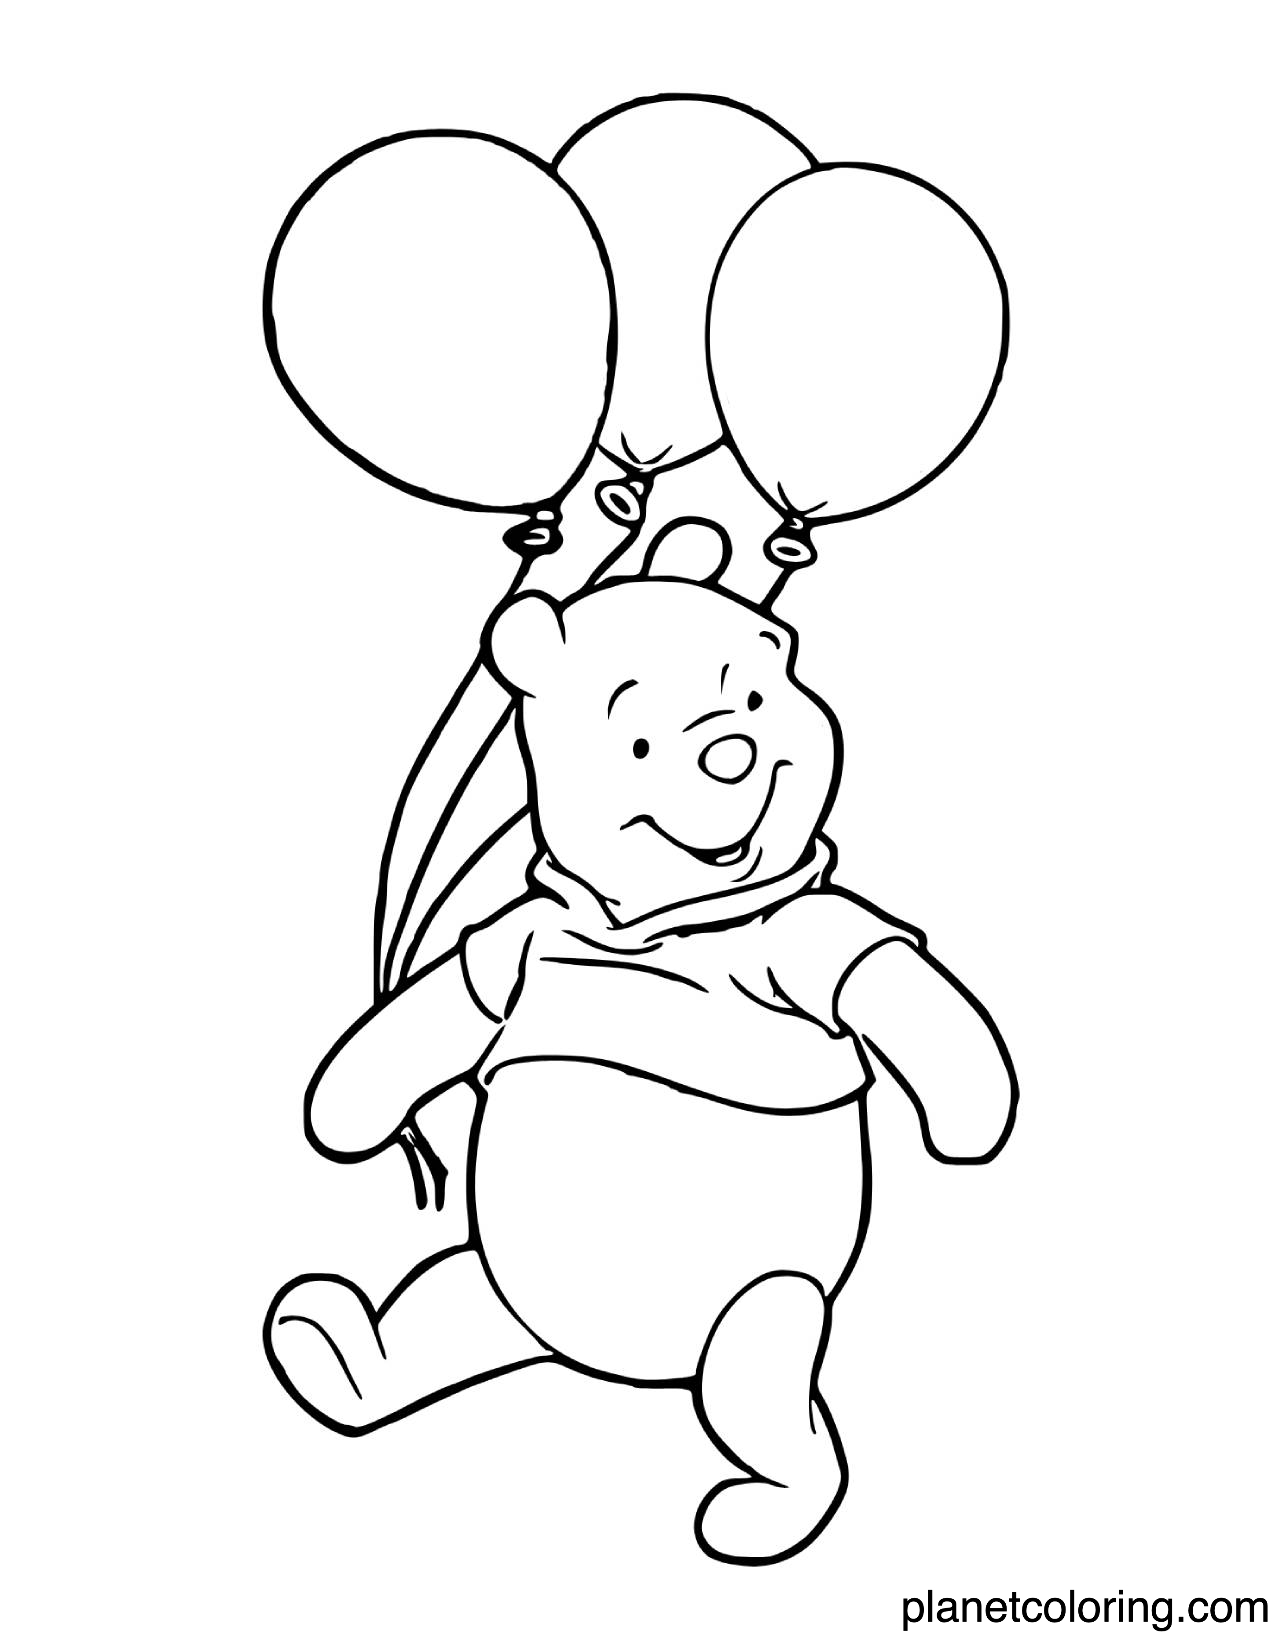 Pooh holding balloons